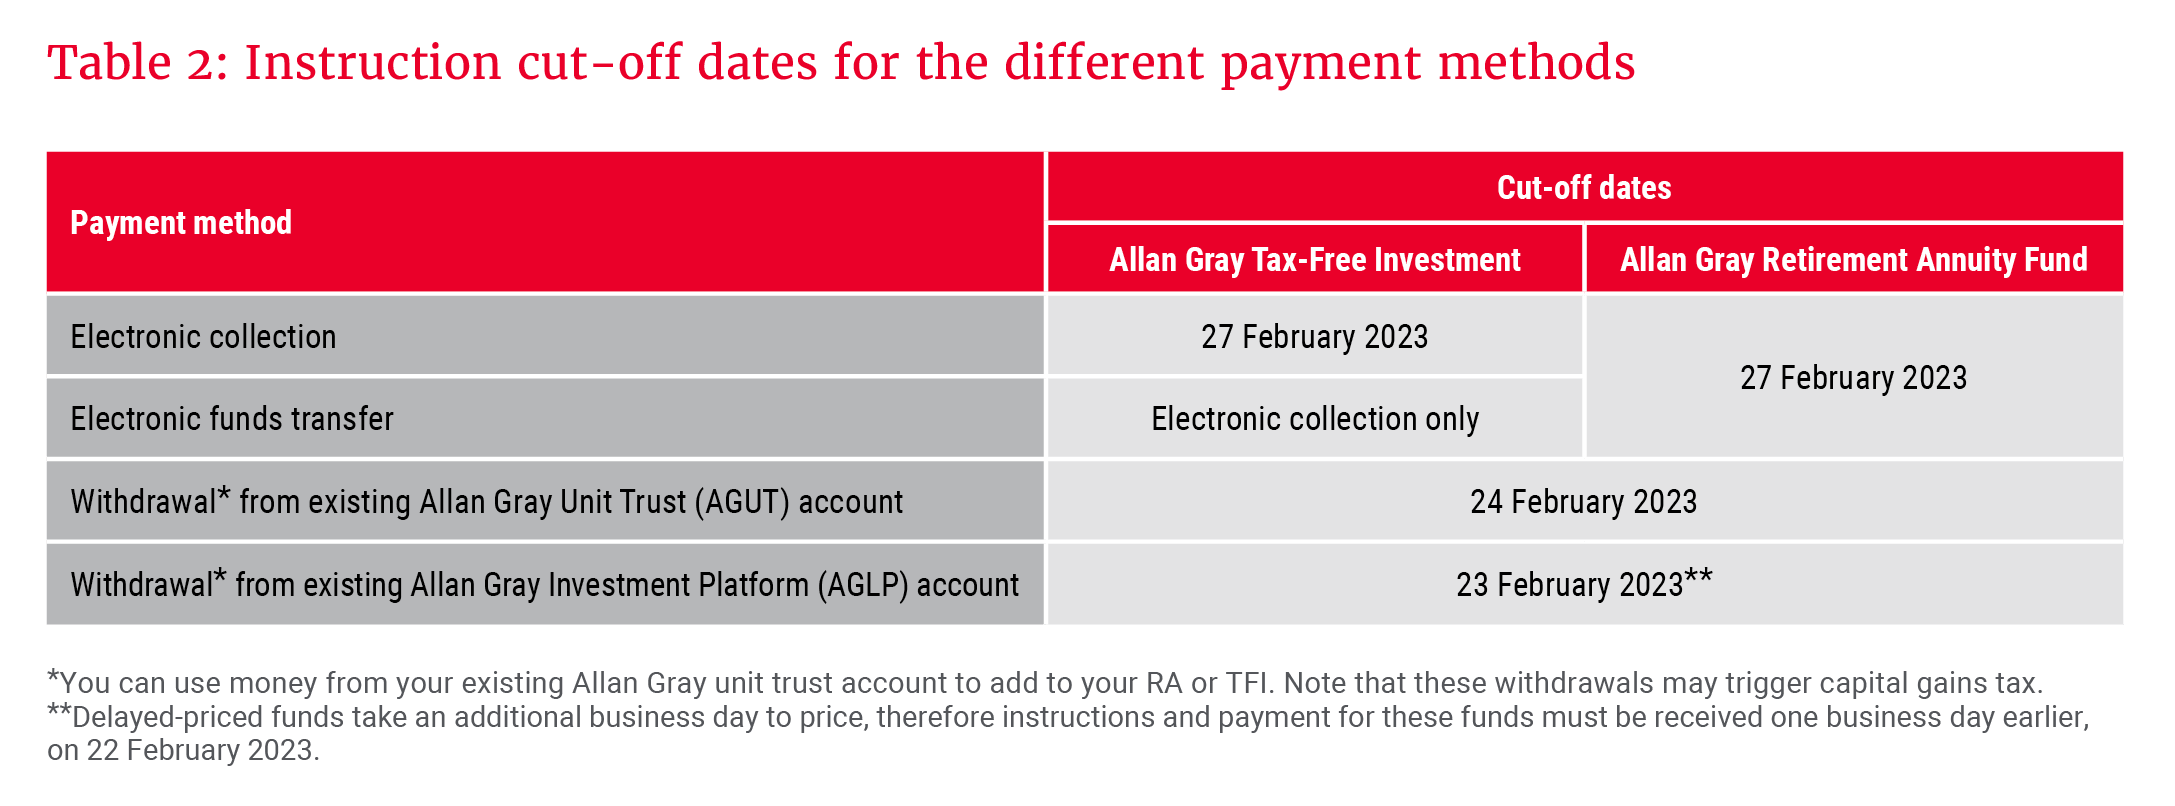 Table 2_Instruction cut-off dates for the different payment methods